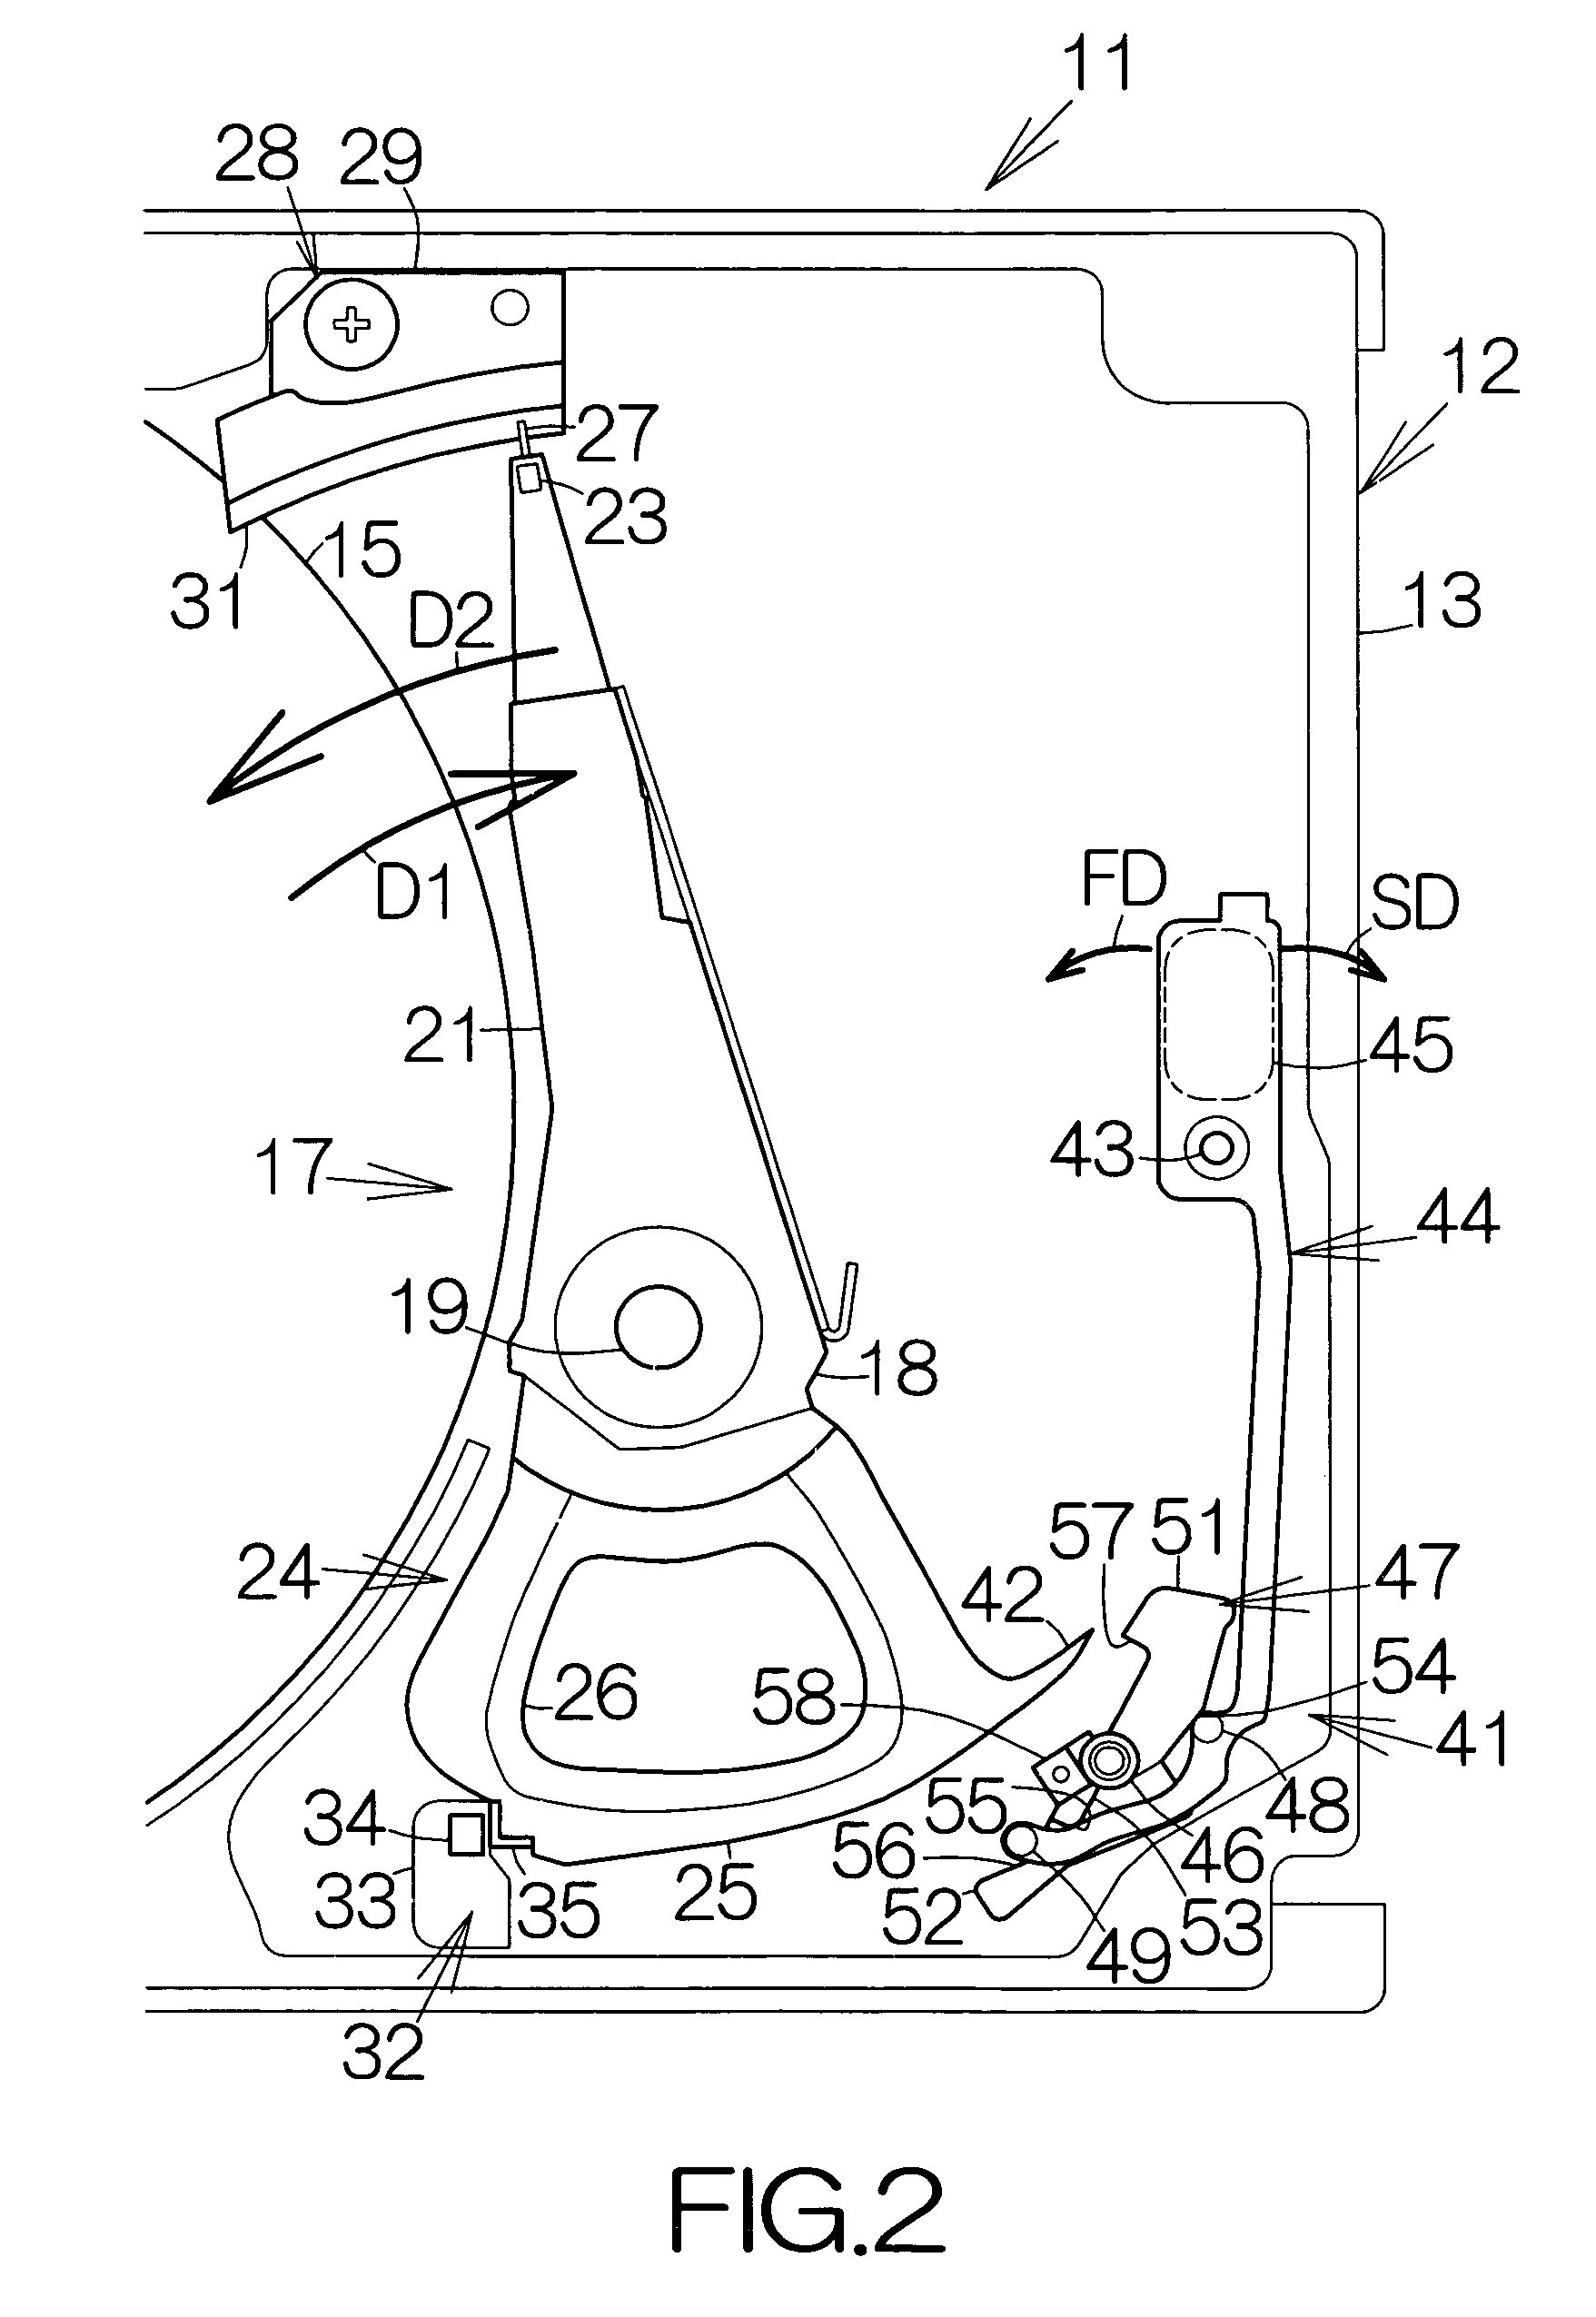 Disk drive internal latch assembly with movement restriction member to generate opposing rotation moments on shaft opposing sides